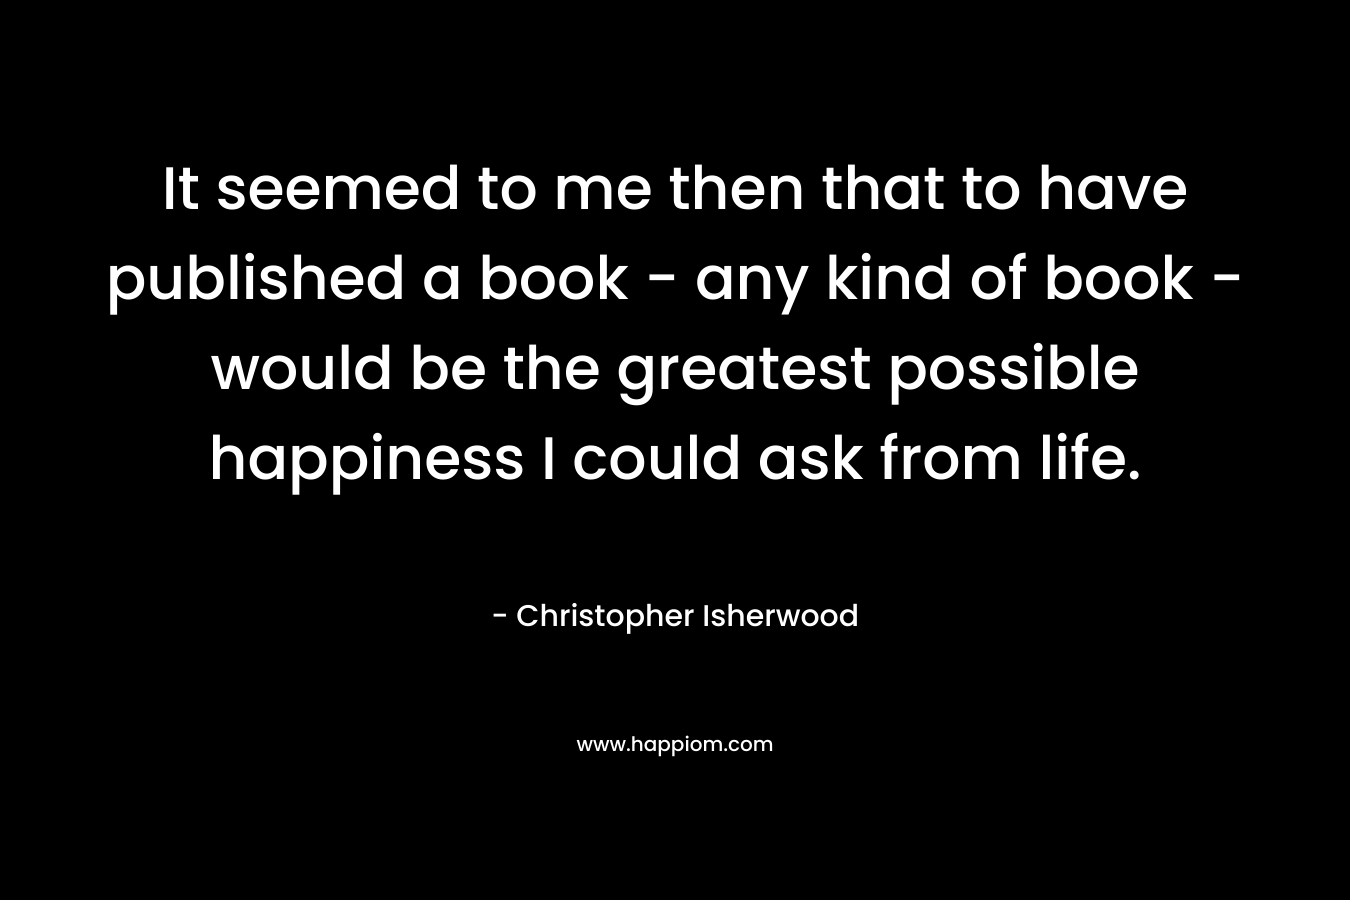 It seemed to me then that to have published a book – any kind of book – would be the greatest possible happiness I could ask from life. – Christopher Isherwood